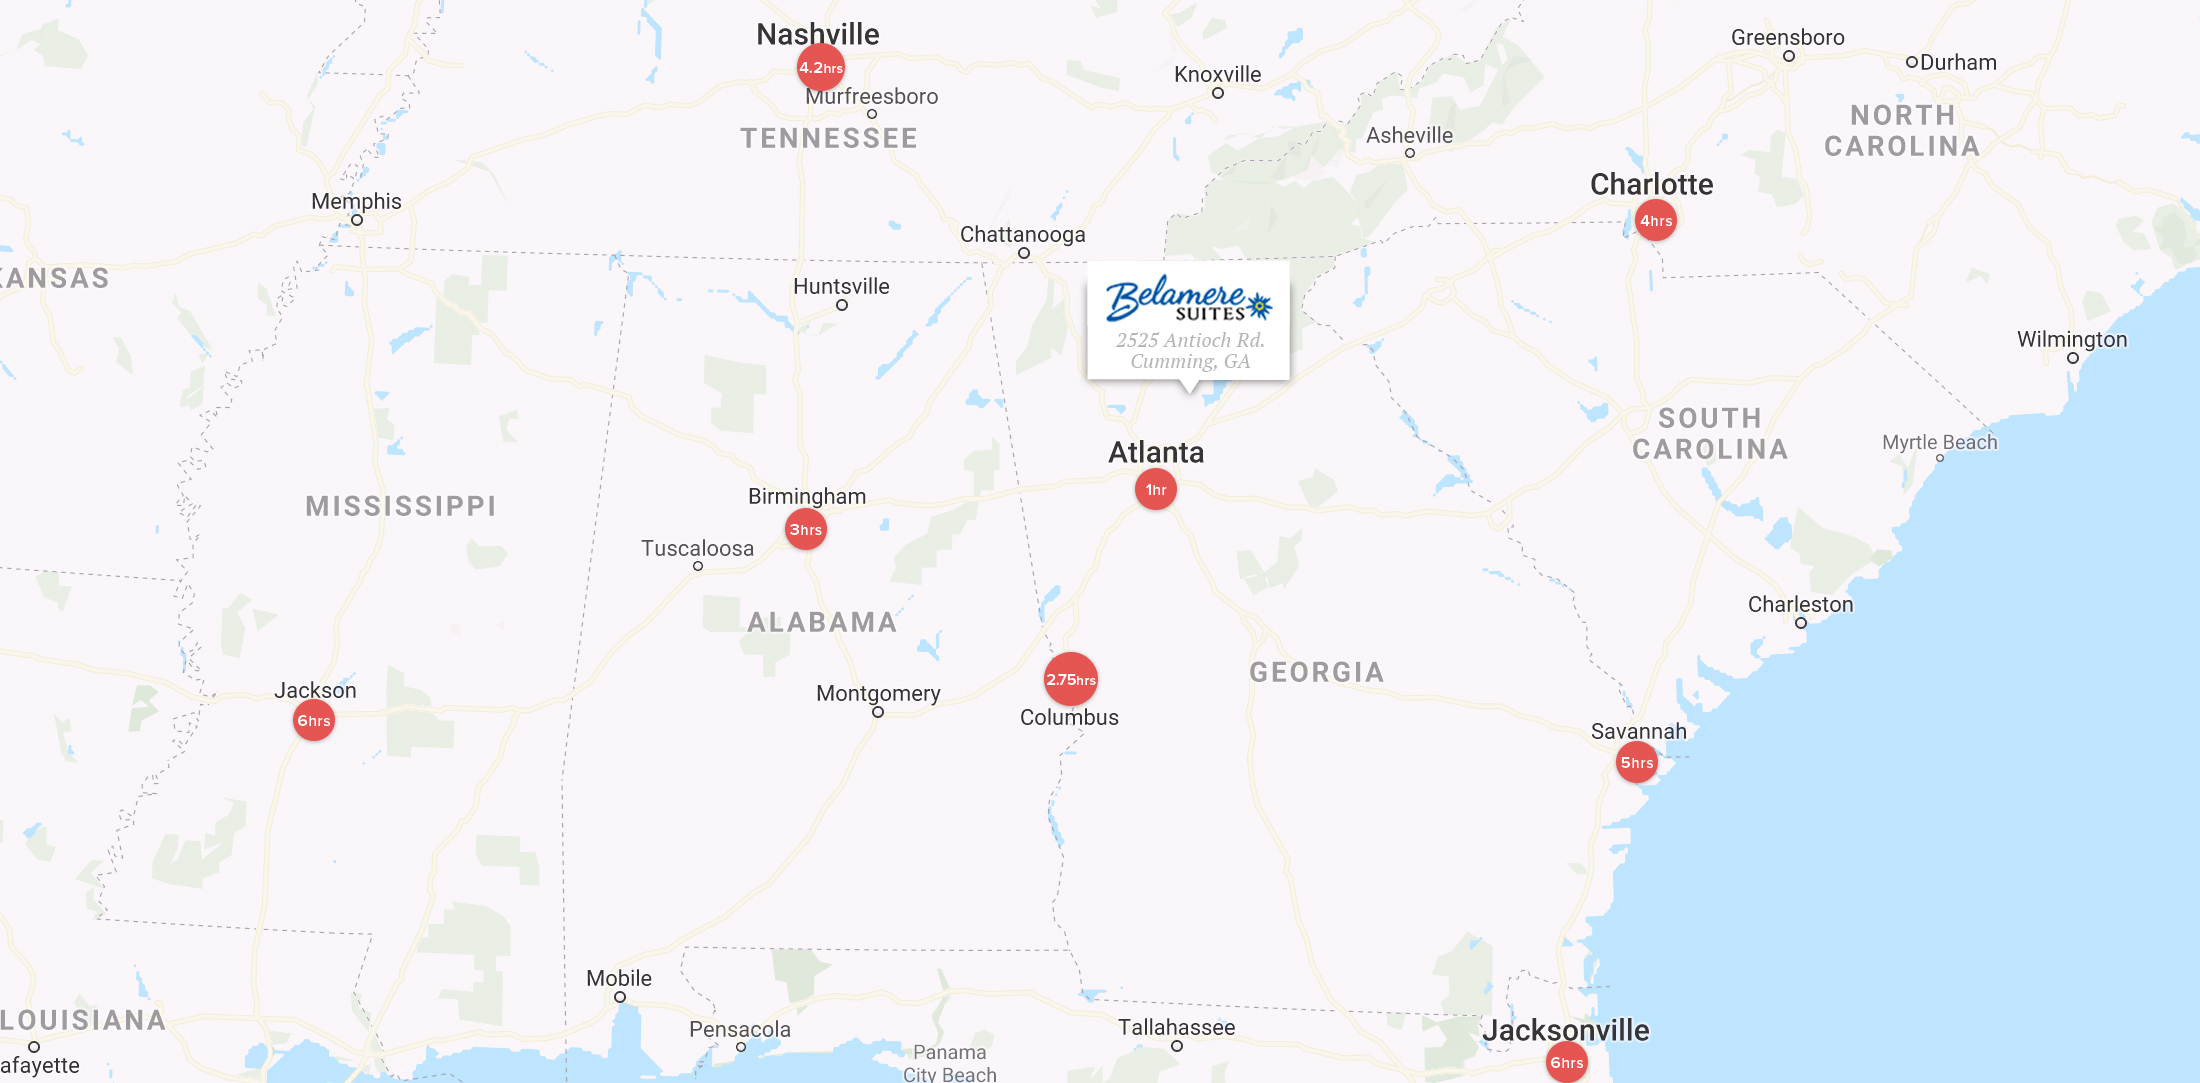 Balemere Suits Map in Georgia